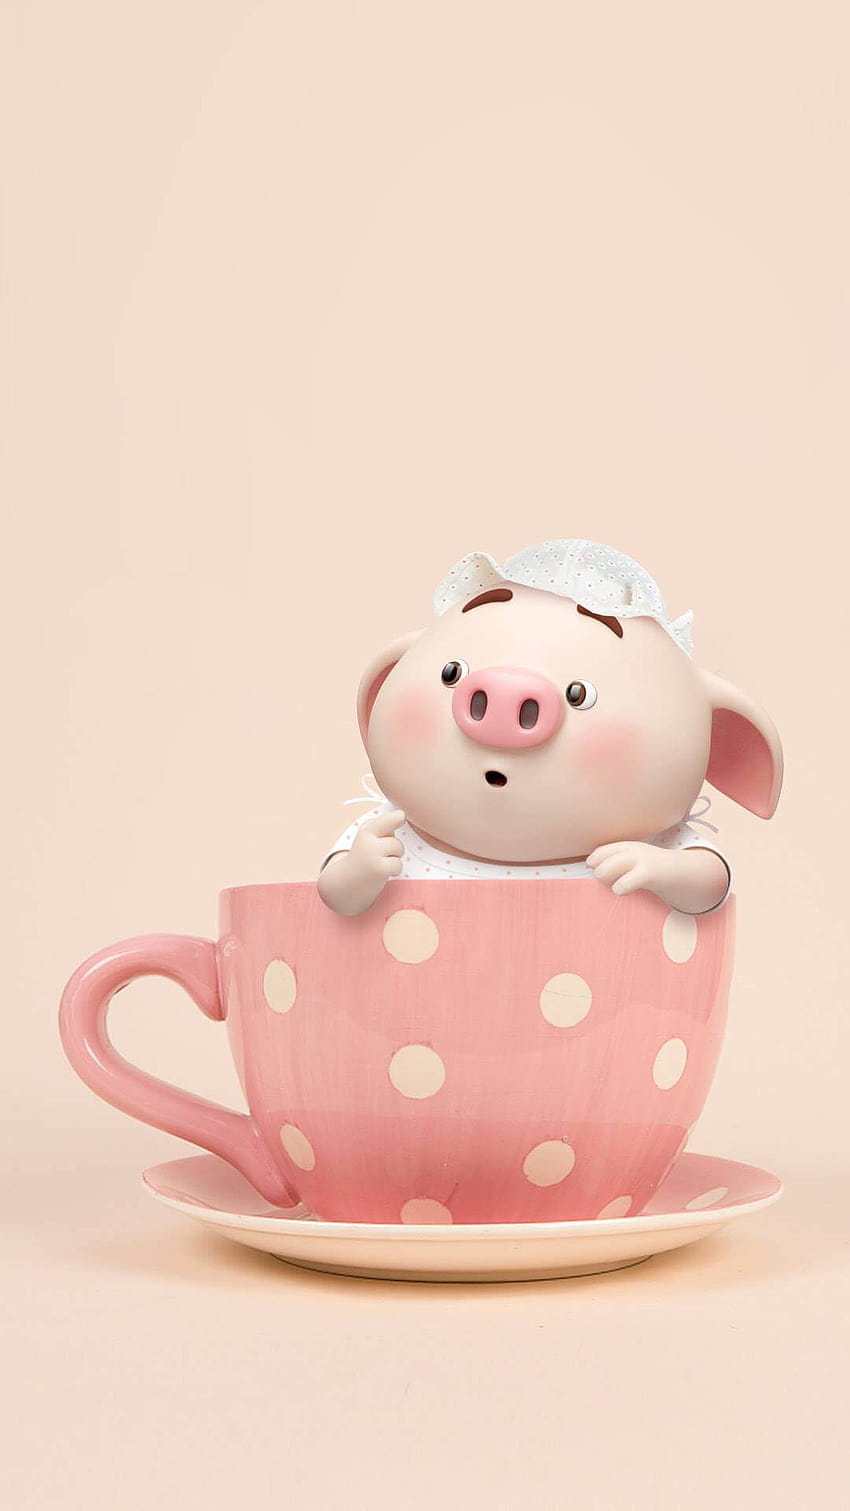 Cute Pig Backgrounds Mobile, pig iphone HD phone wallpaper